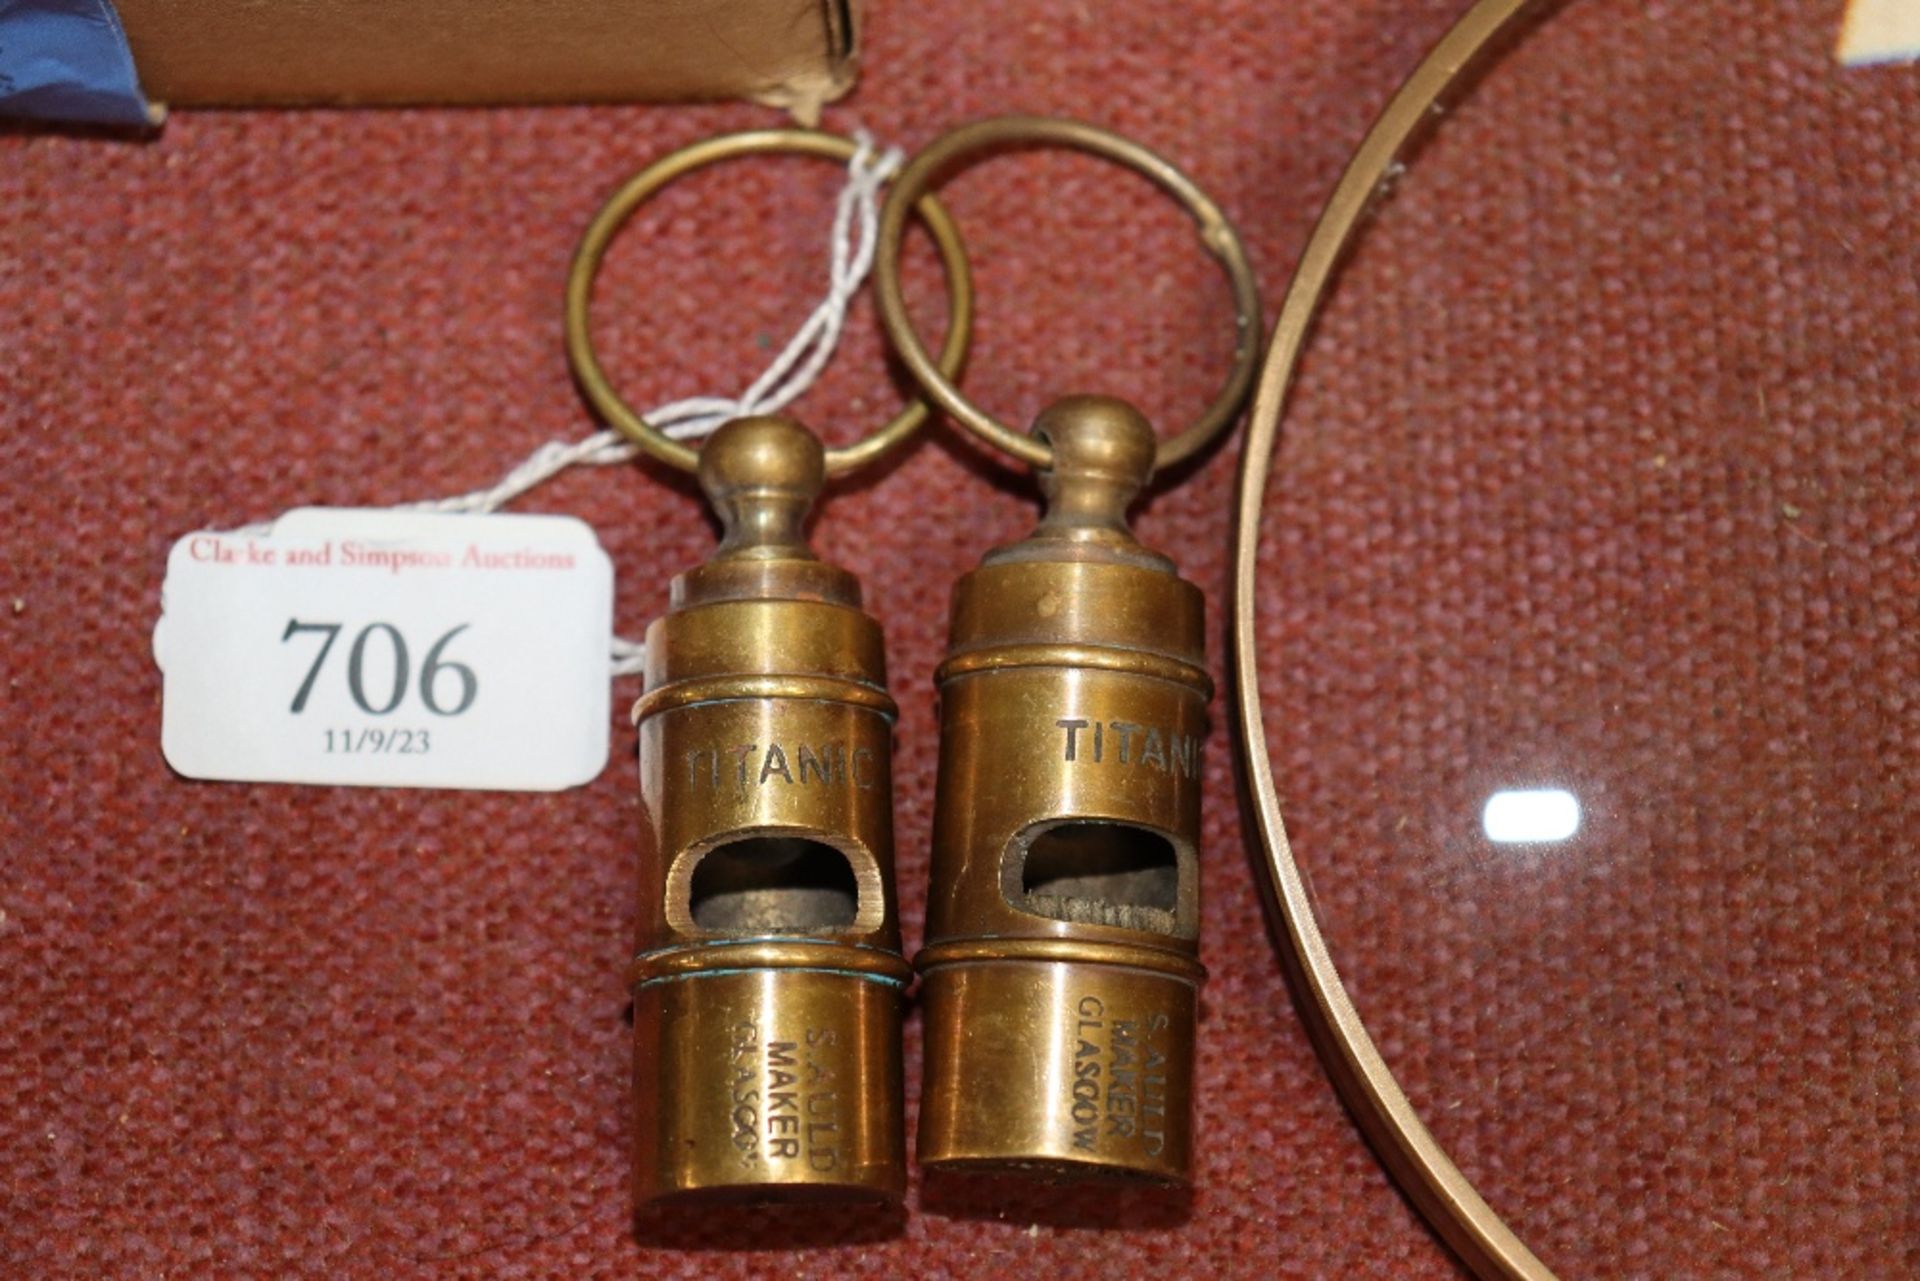 Two reproduction whistles